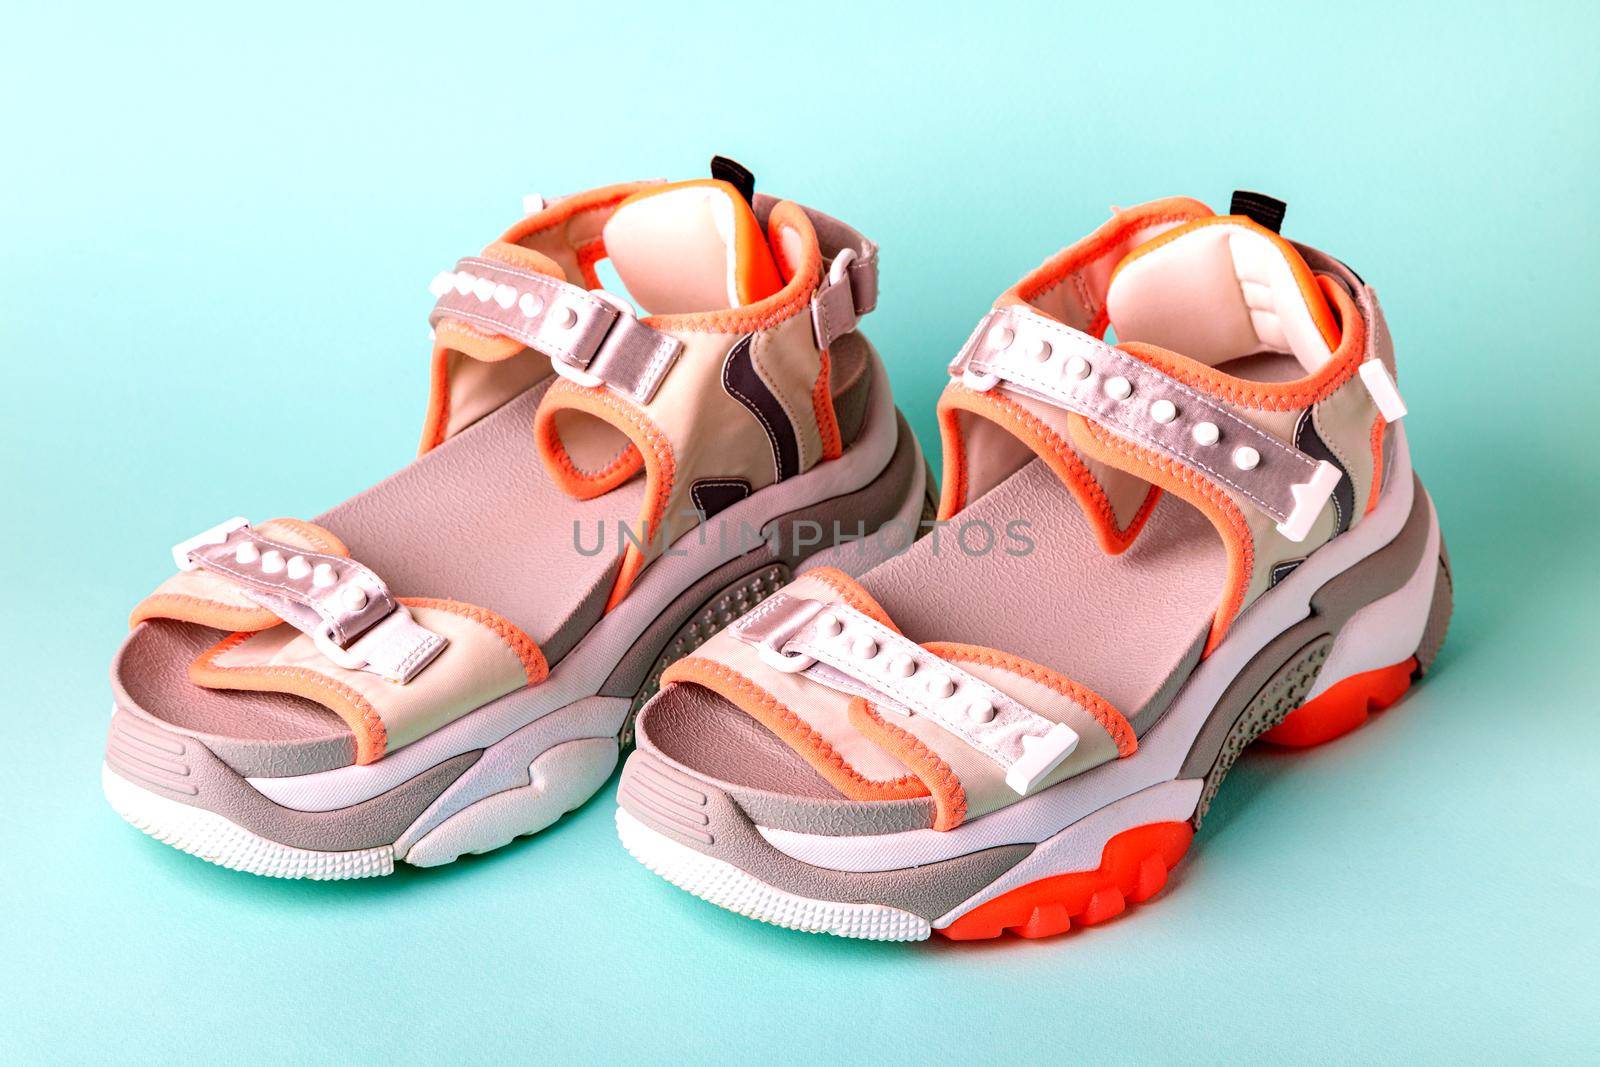 Women's, fashionable, sports sandals with orange accents on a blue background. New youth shoes for girls. Front view.